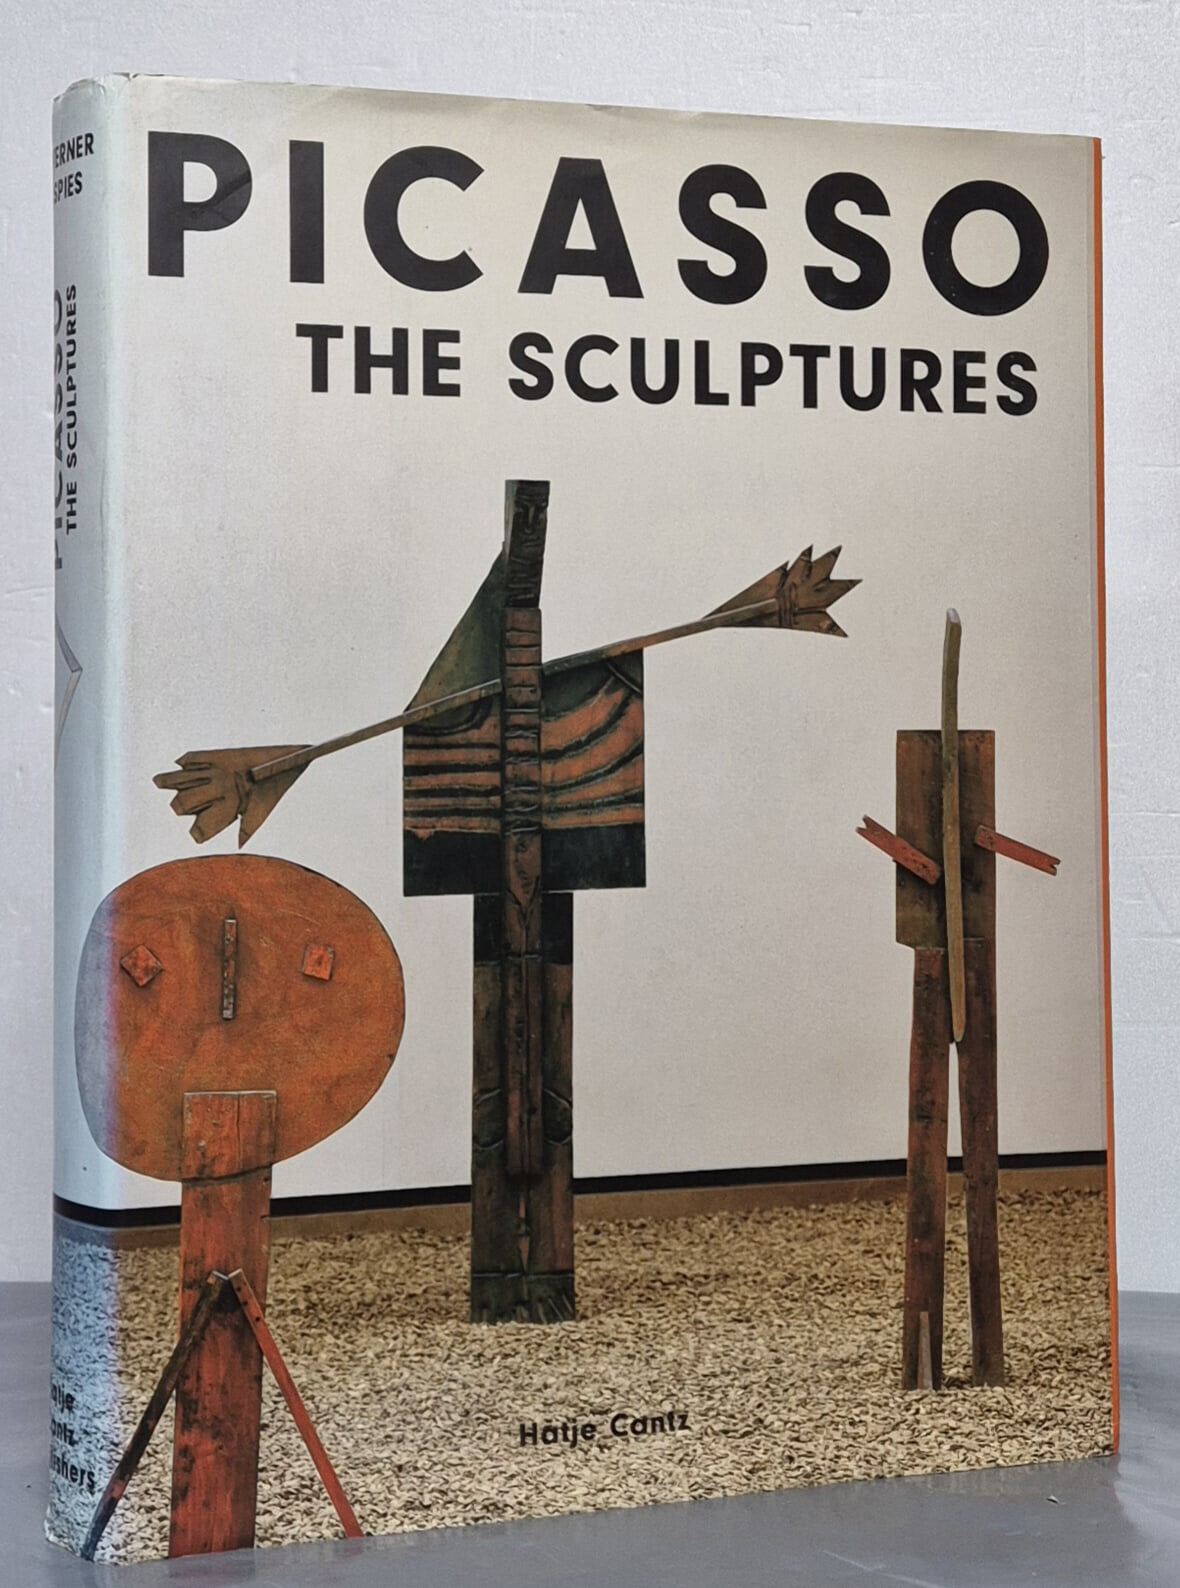 Picasso: The Sculptures (Hardcover)